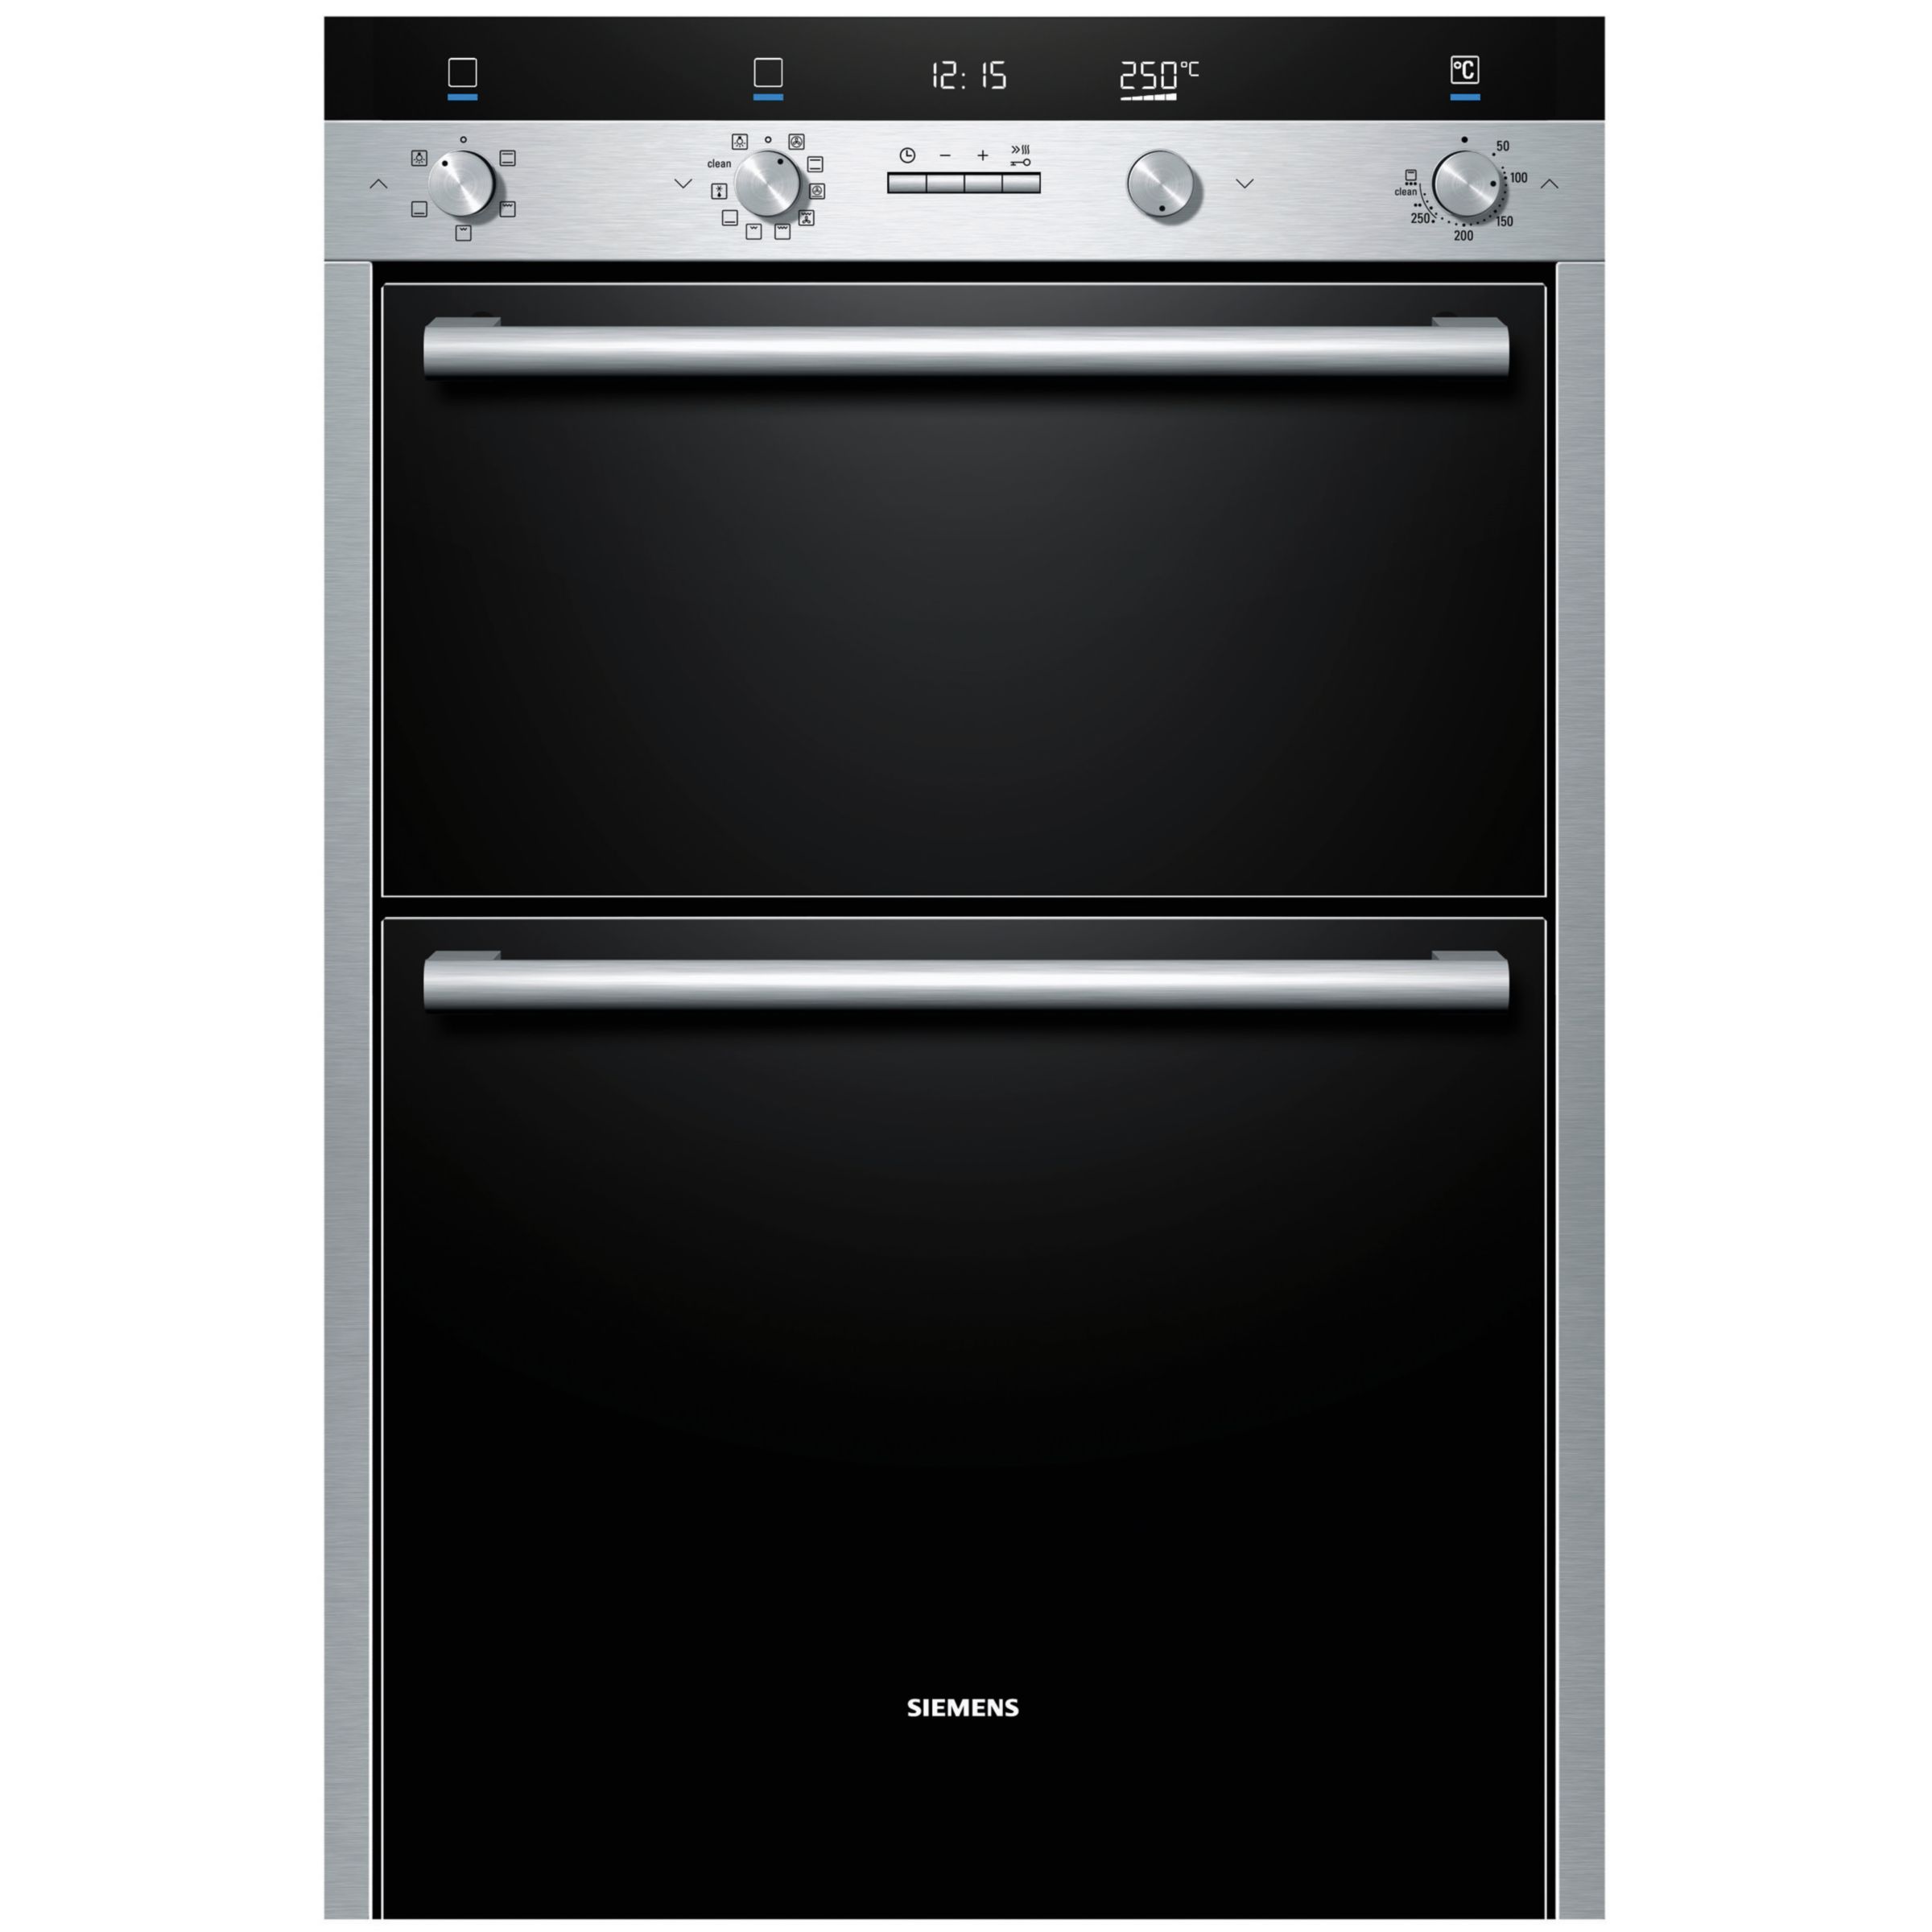 Siemens HB55MB550B Double Electric Oven, Stainless Steel at JohnLewis